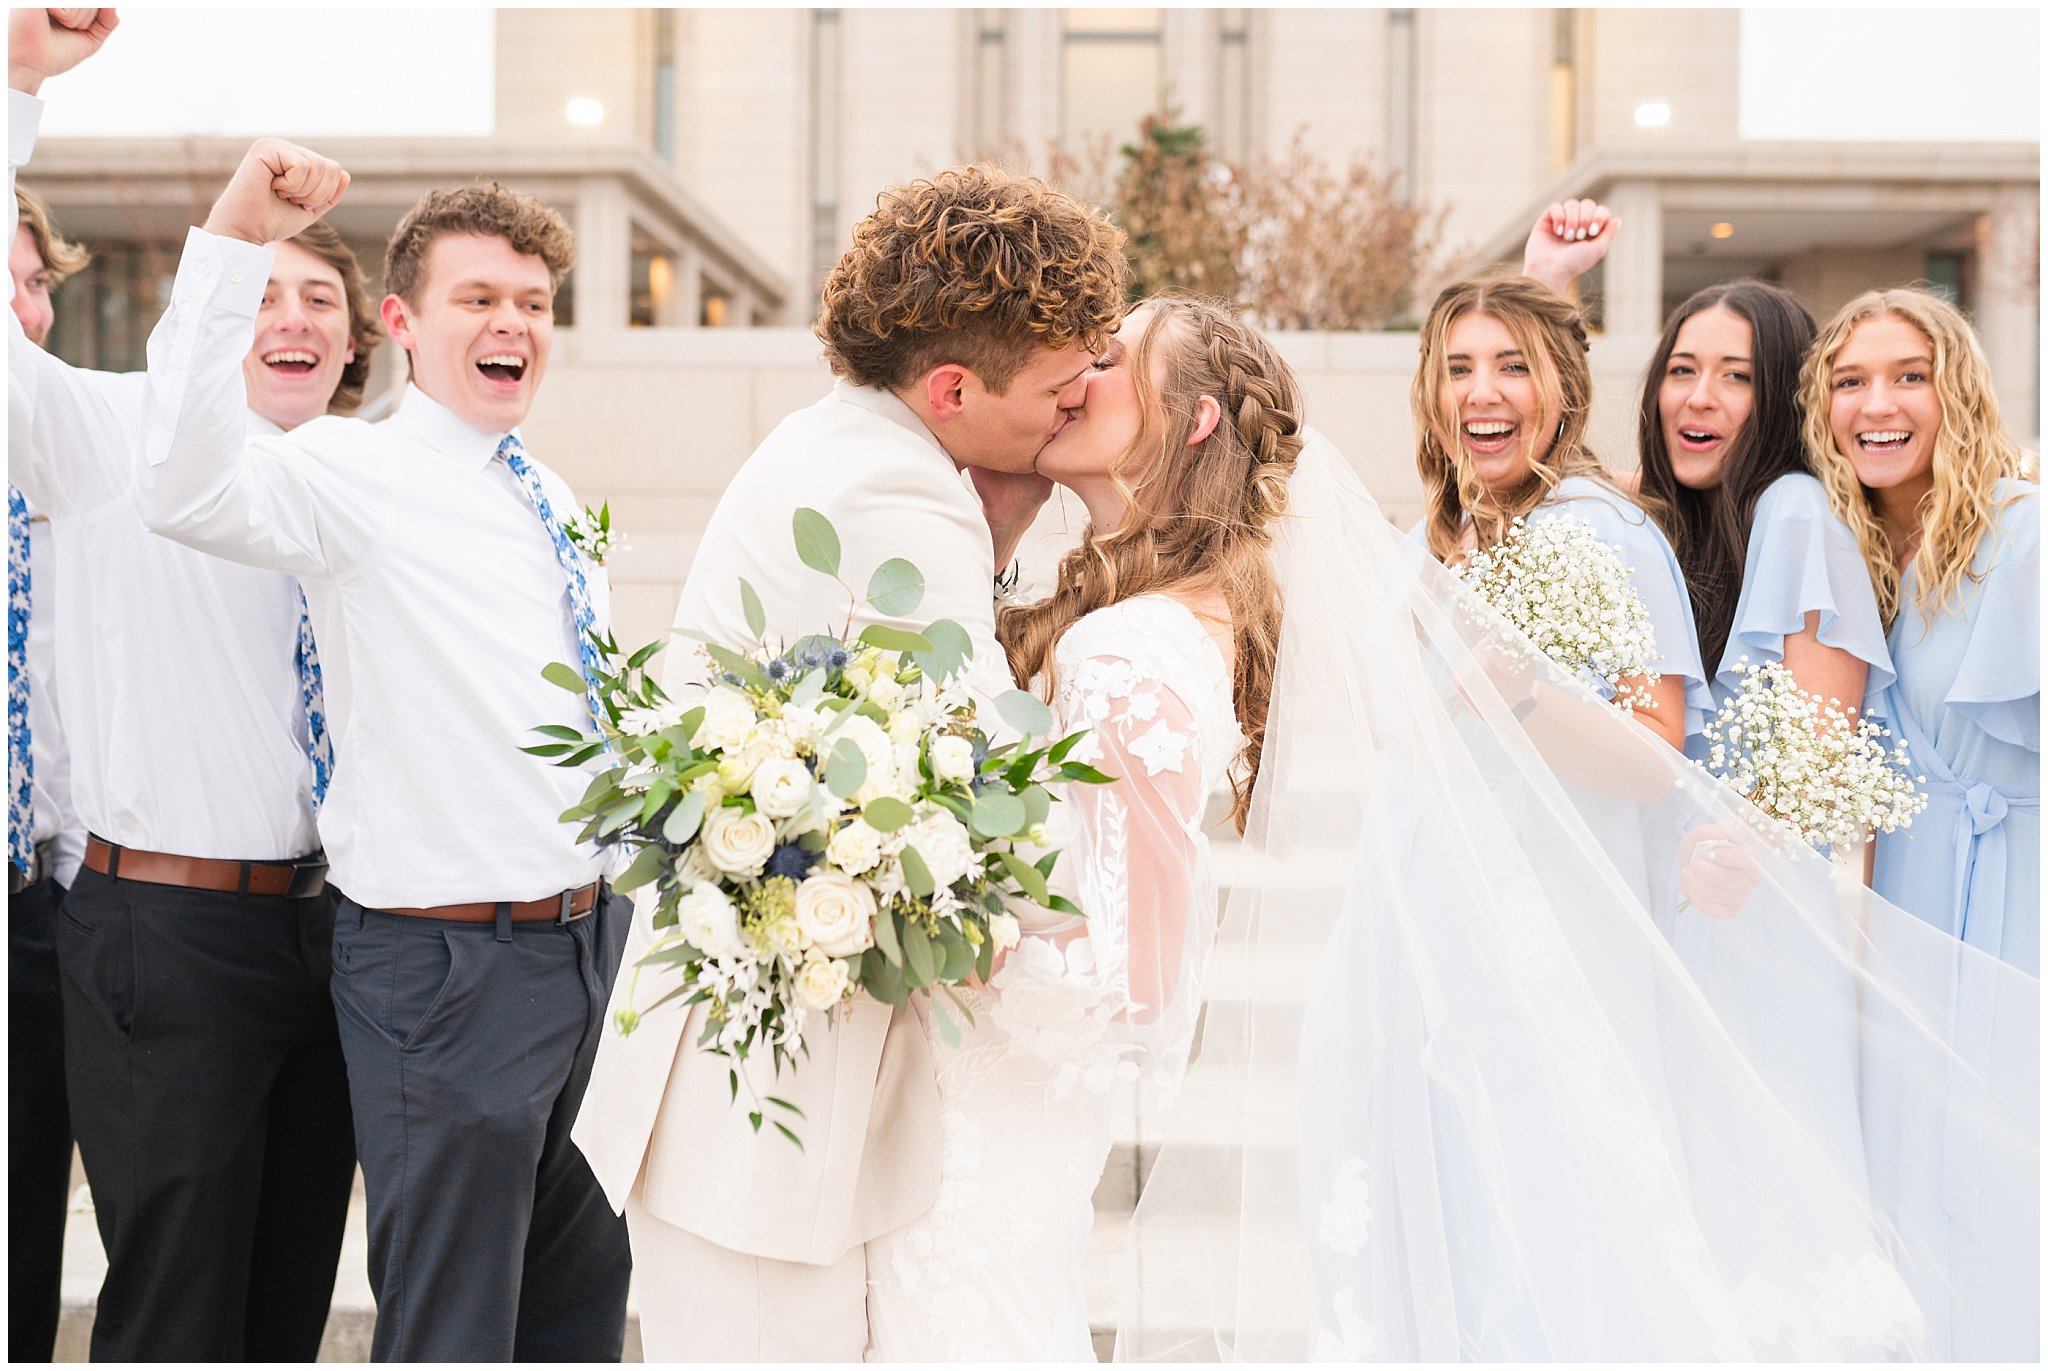 Wedding party with light blue dresses and ties with white bouquets | Oquirrh Mountain Temple and Draper Day Barn Winter Wedding | Jessie and Dallin Photography